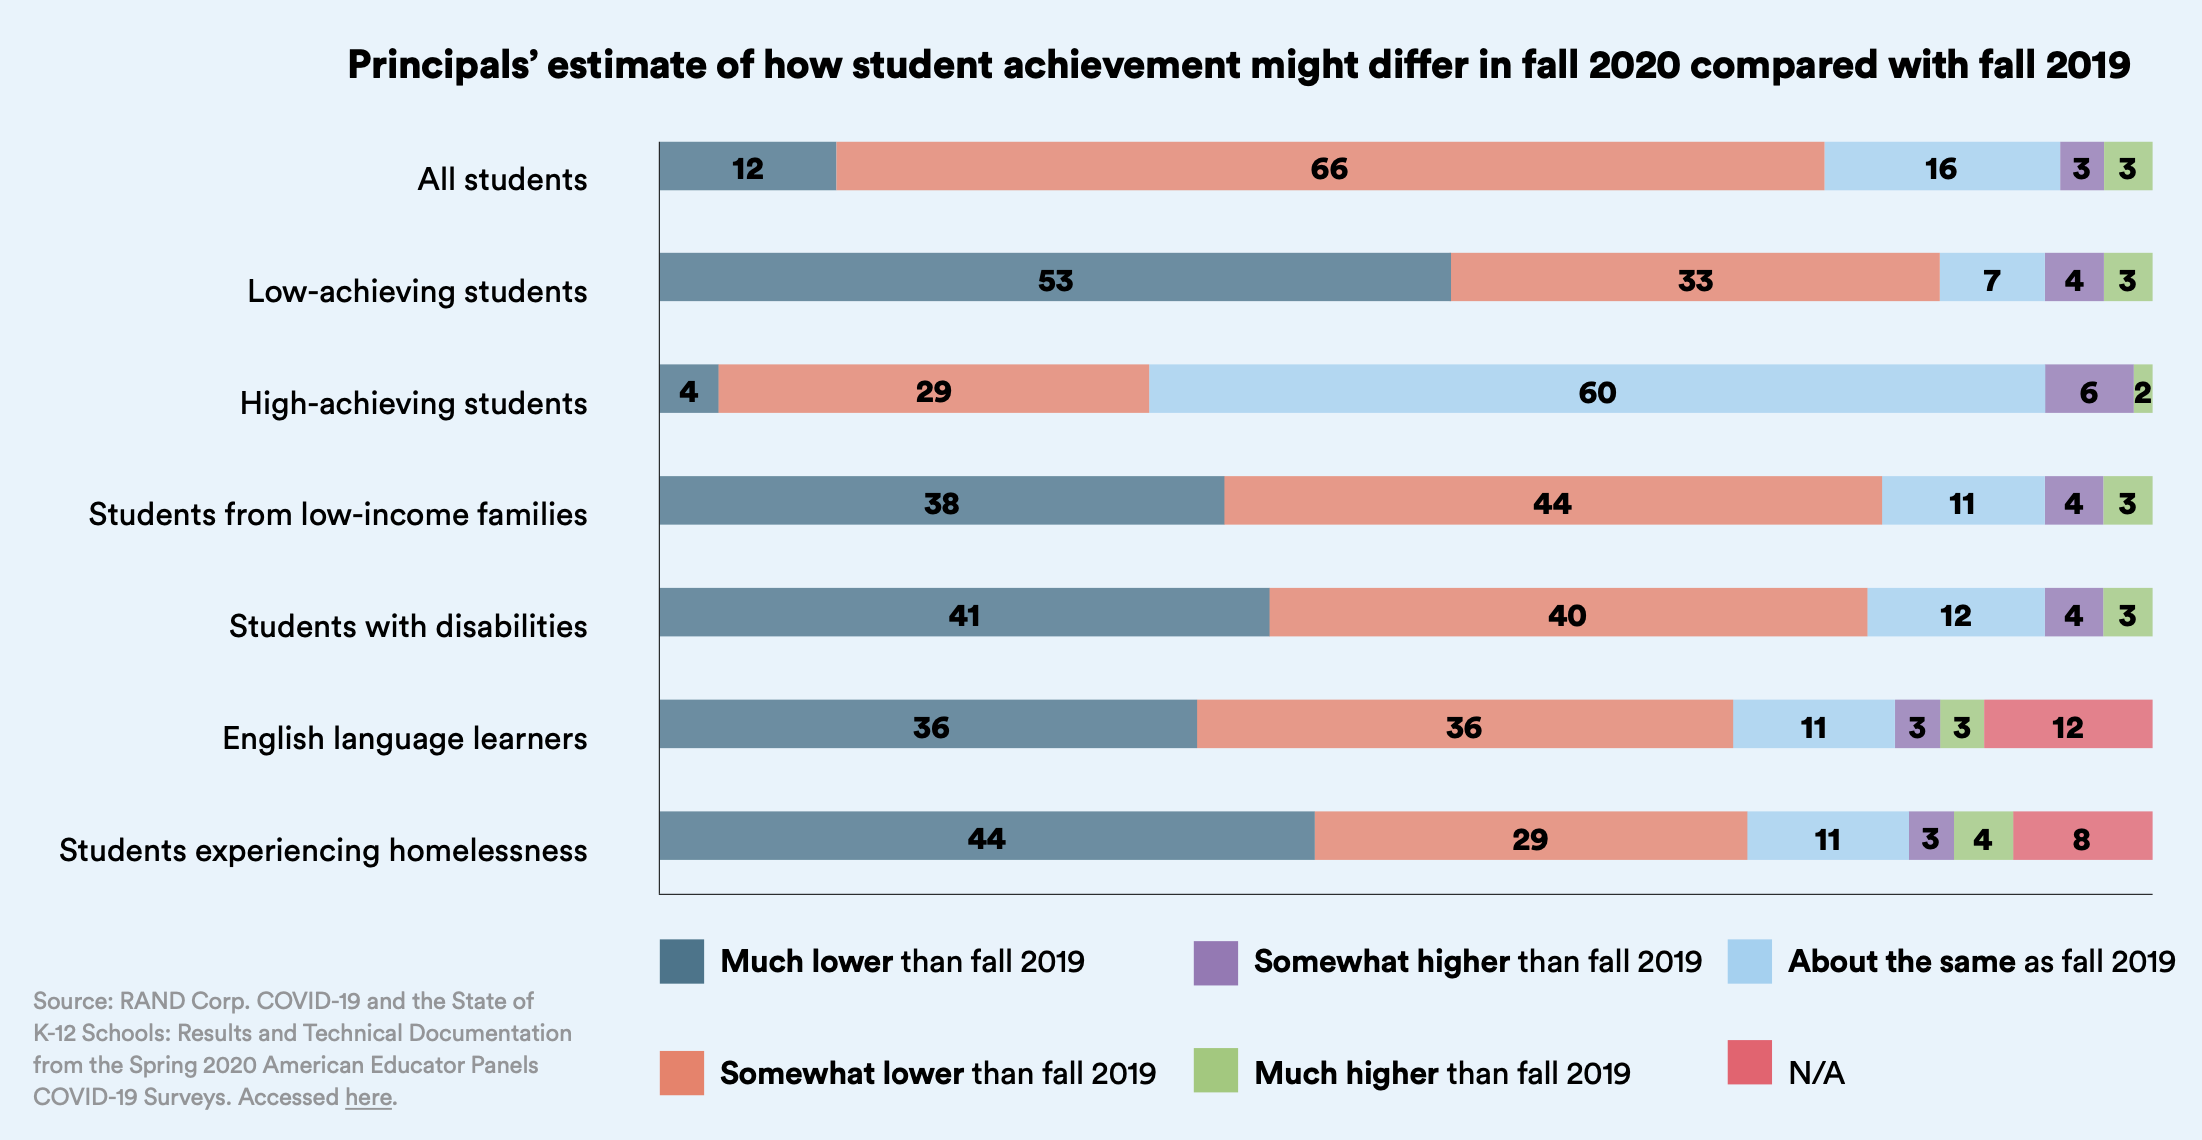 Principals’ estimate of how student achievement might differ in fall 2020 compared with fall 2019